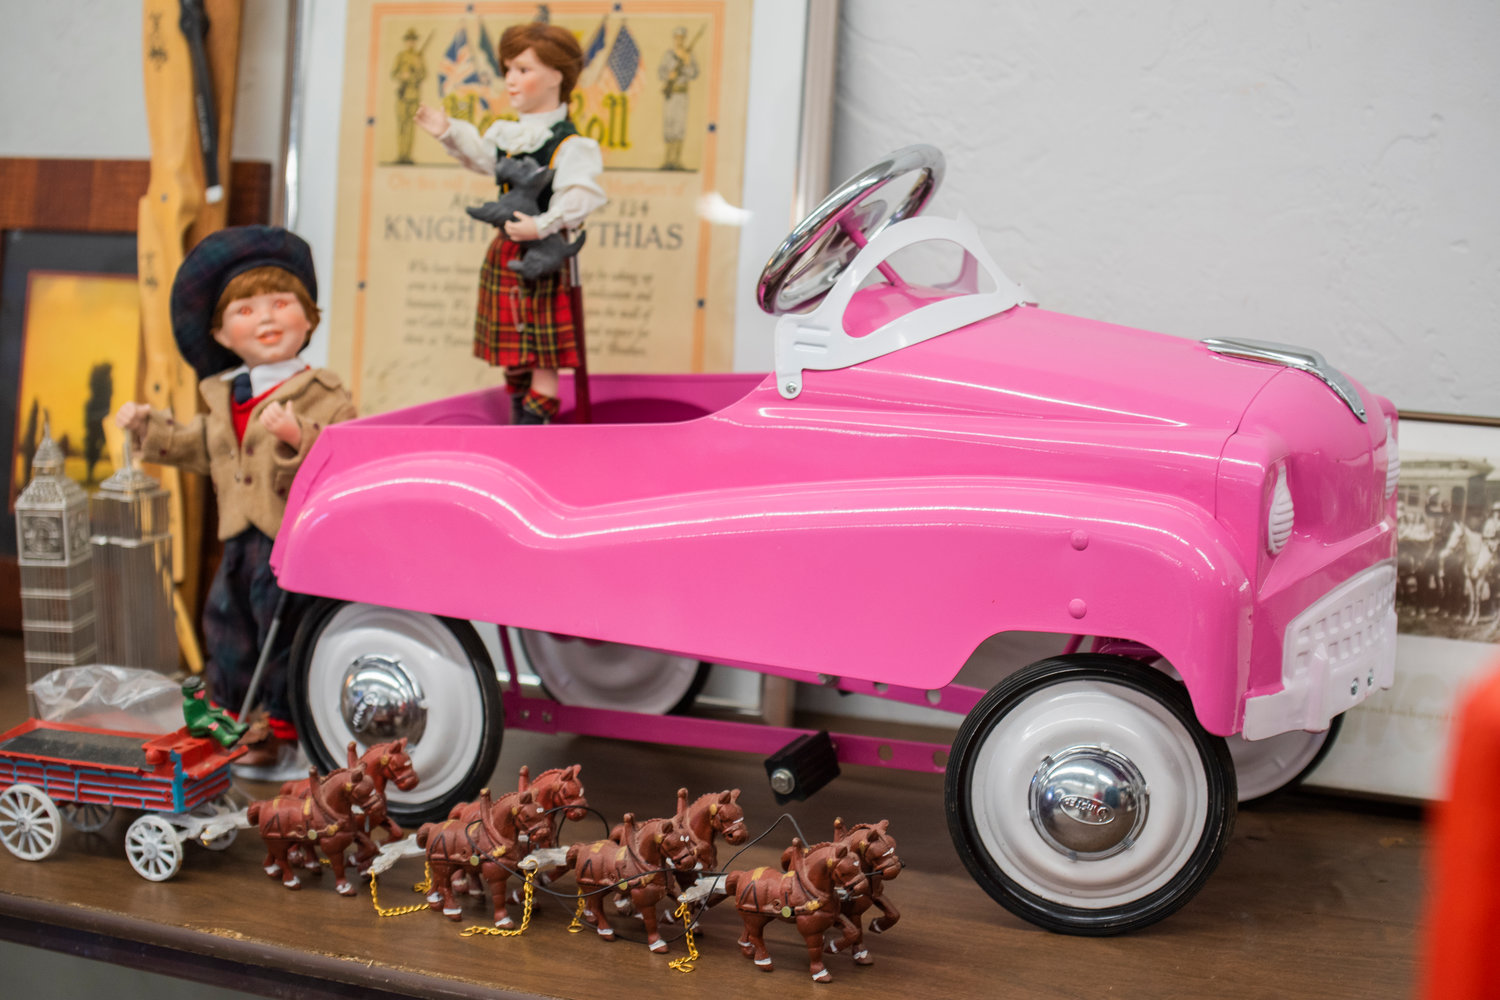 A pink pedal car sits on a table near antique figurines during the Spring Community Garage Sale on Saturday.